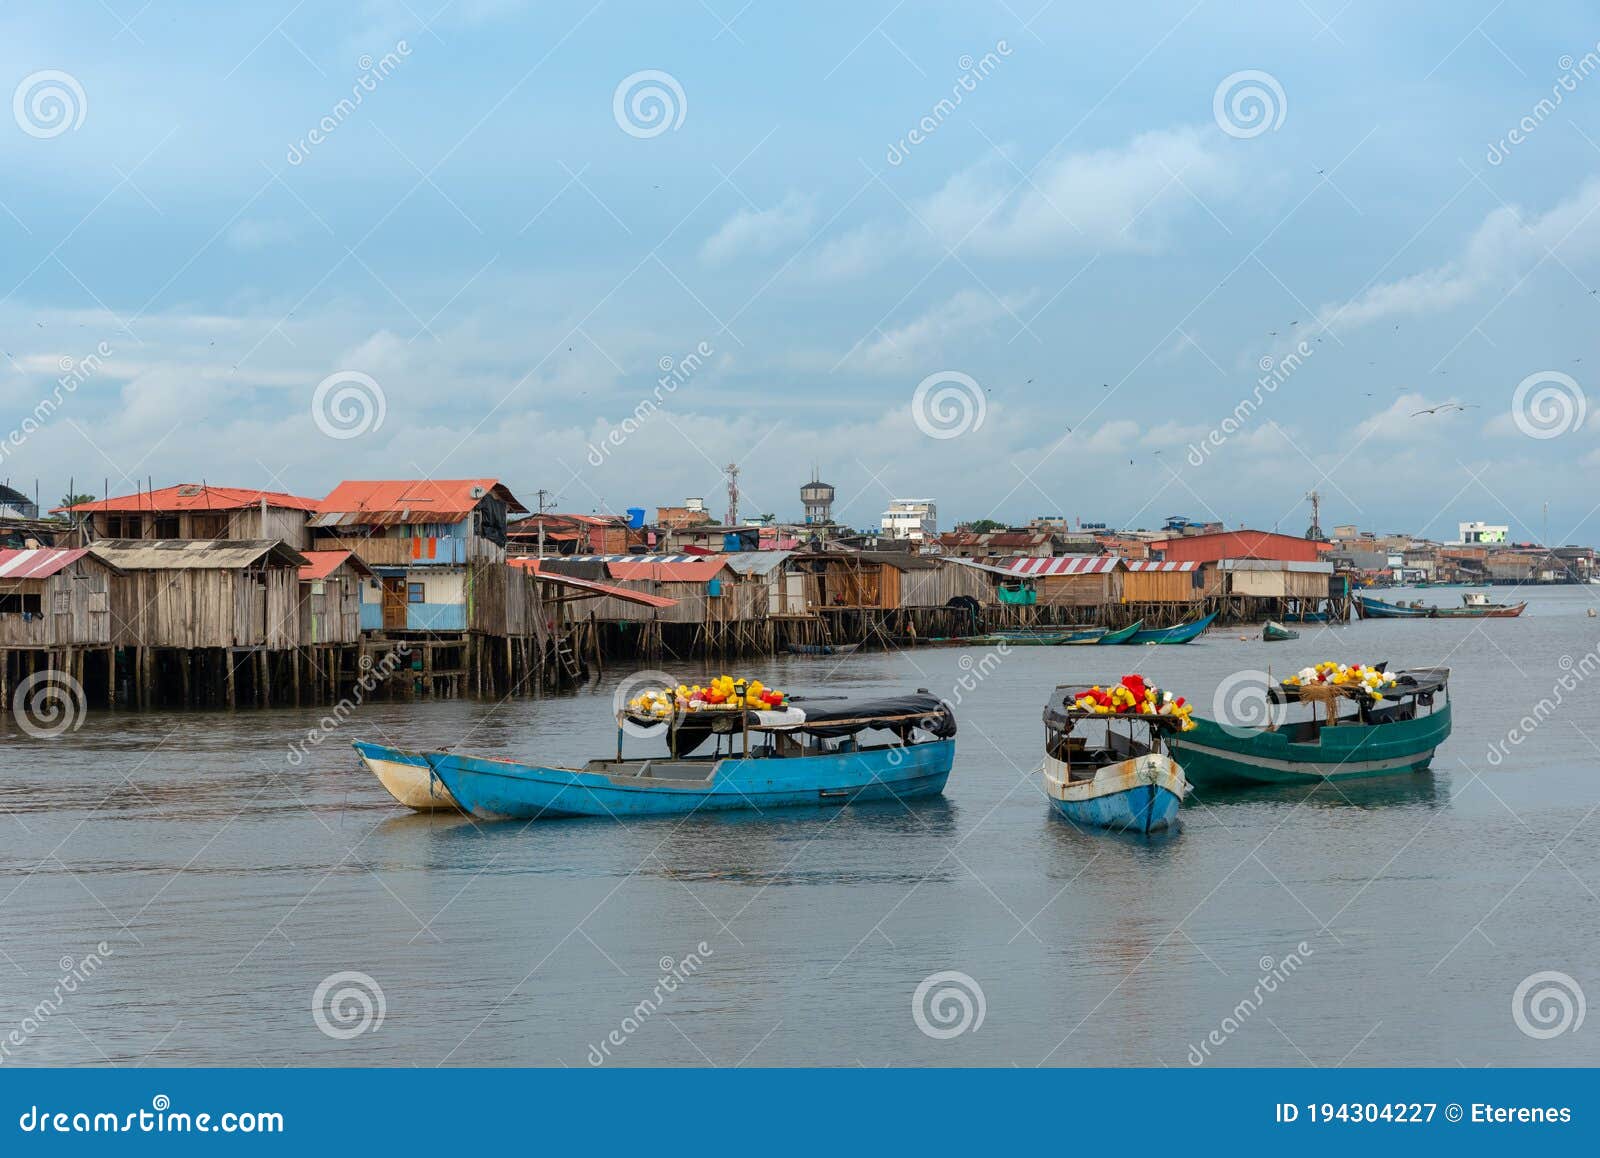 fisherman`s village in the colombian pacific